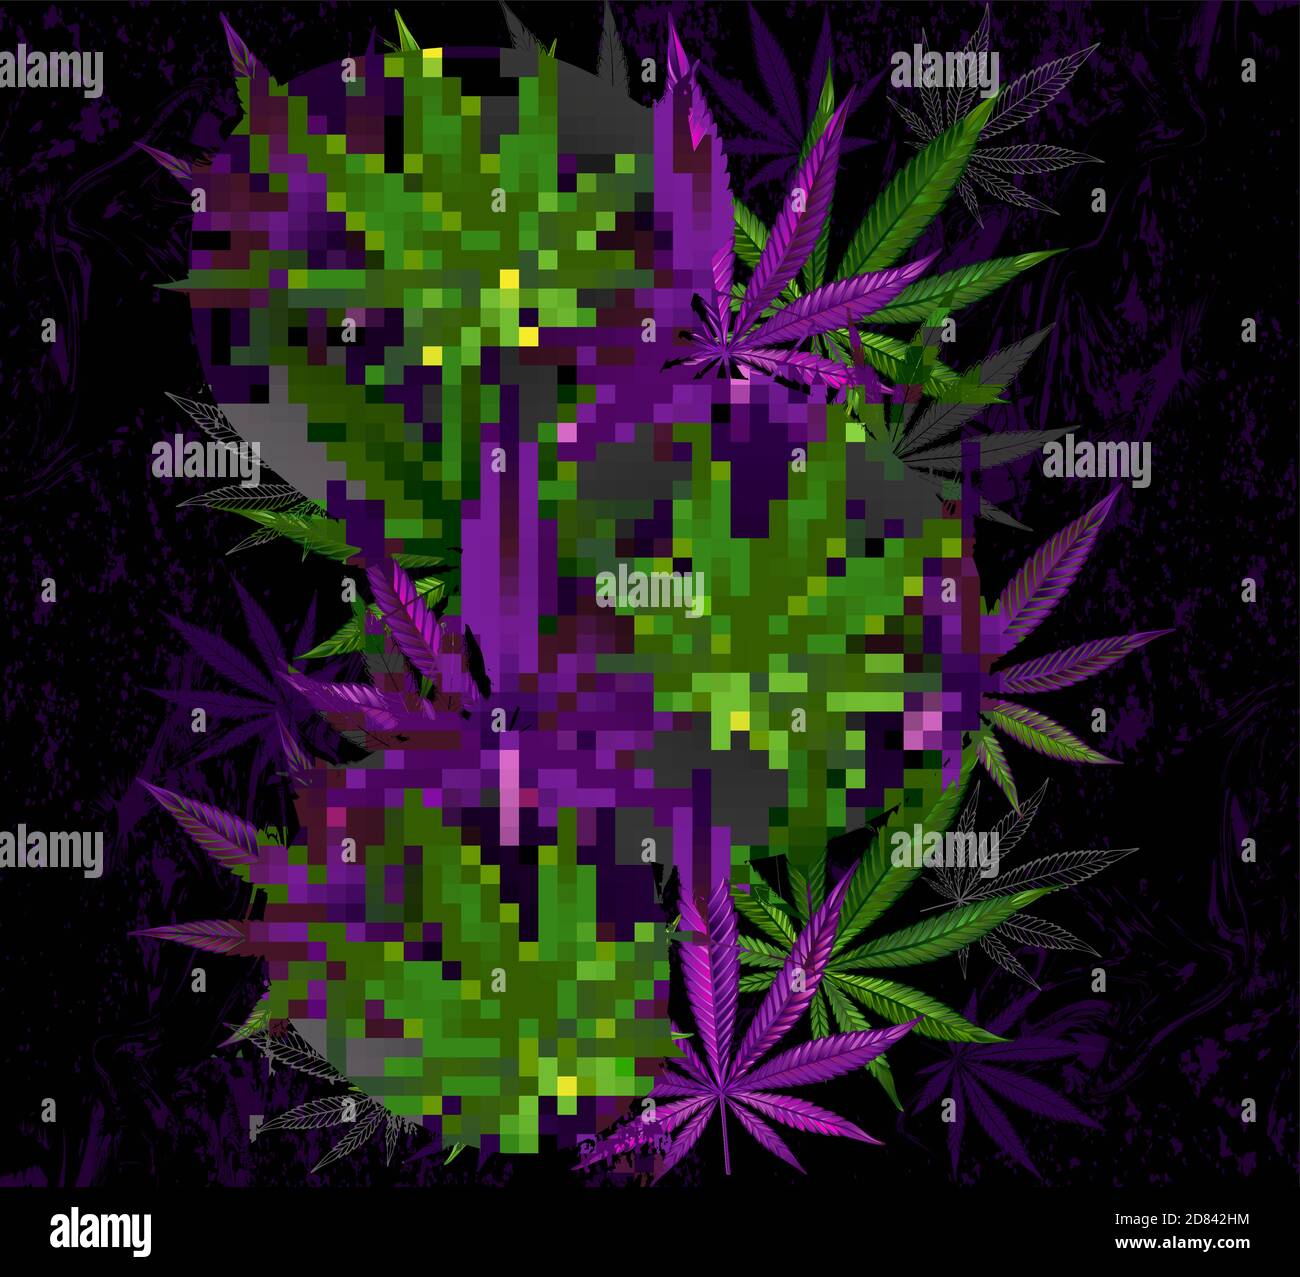 Composition of realistic, purple and green hemp leaves on black background. Cannabis. Stock Vector